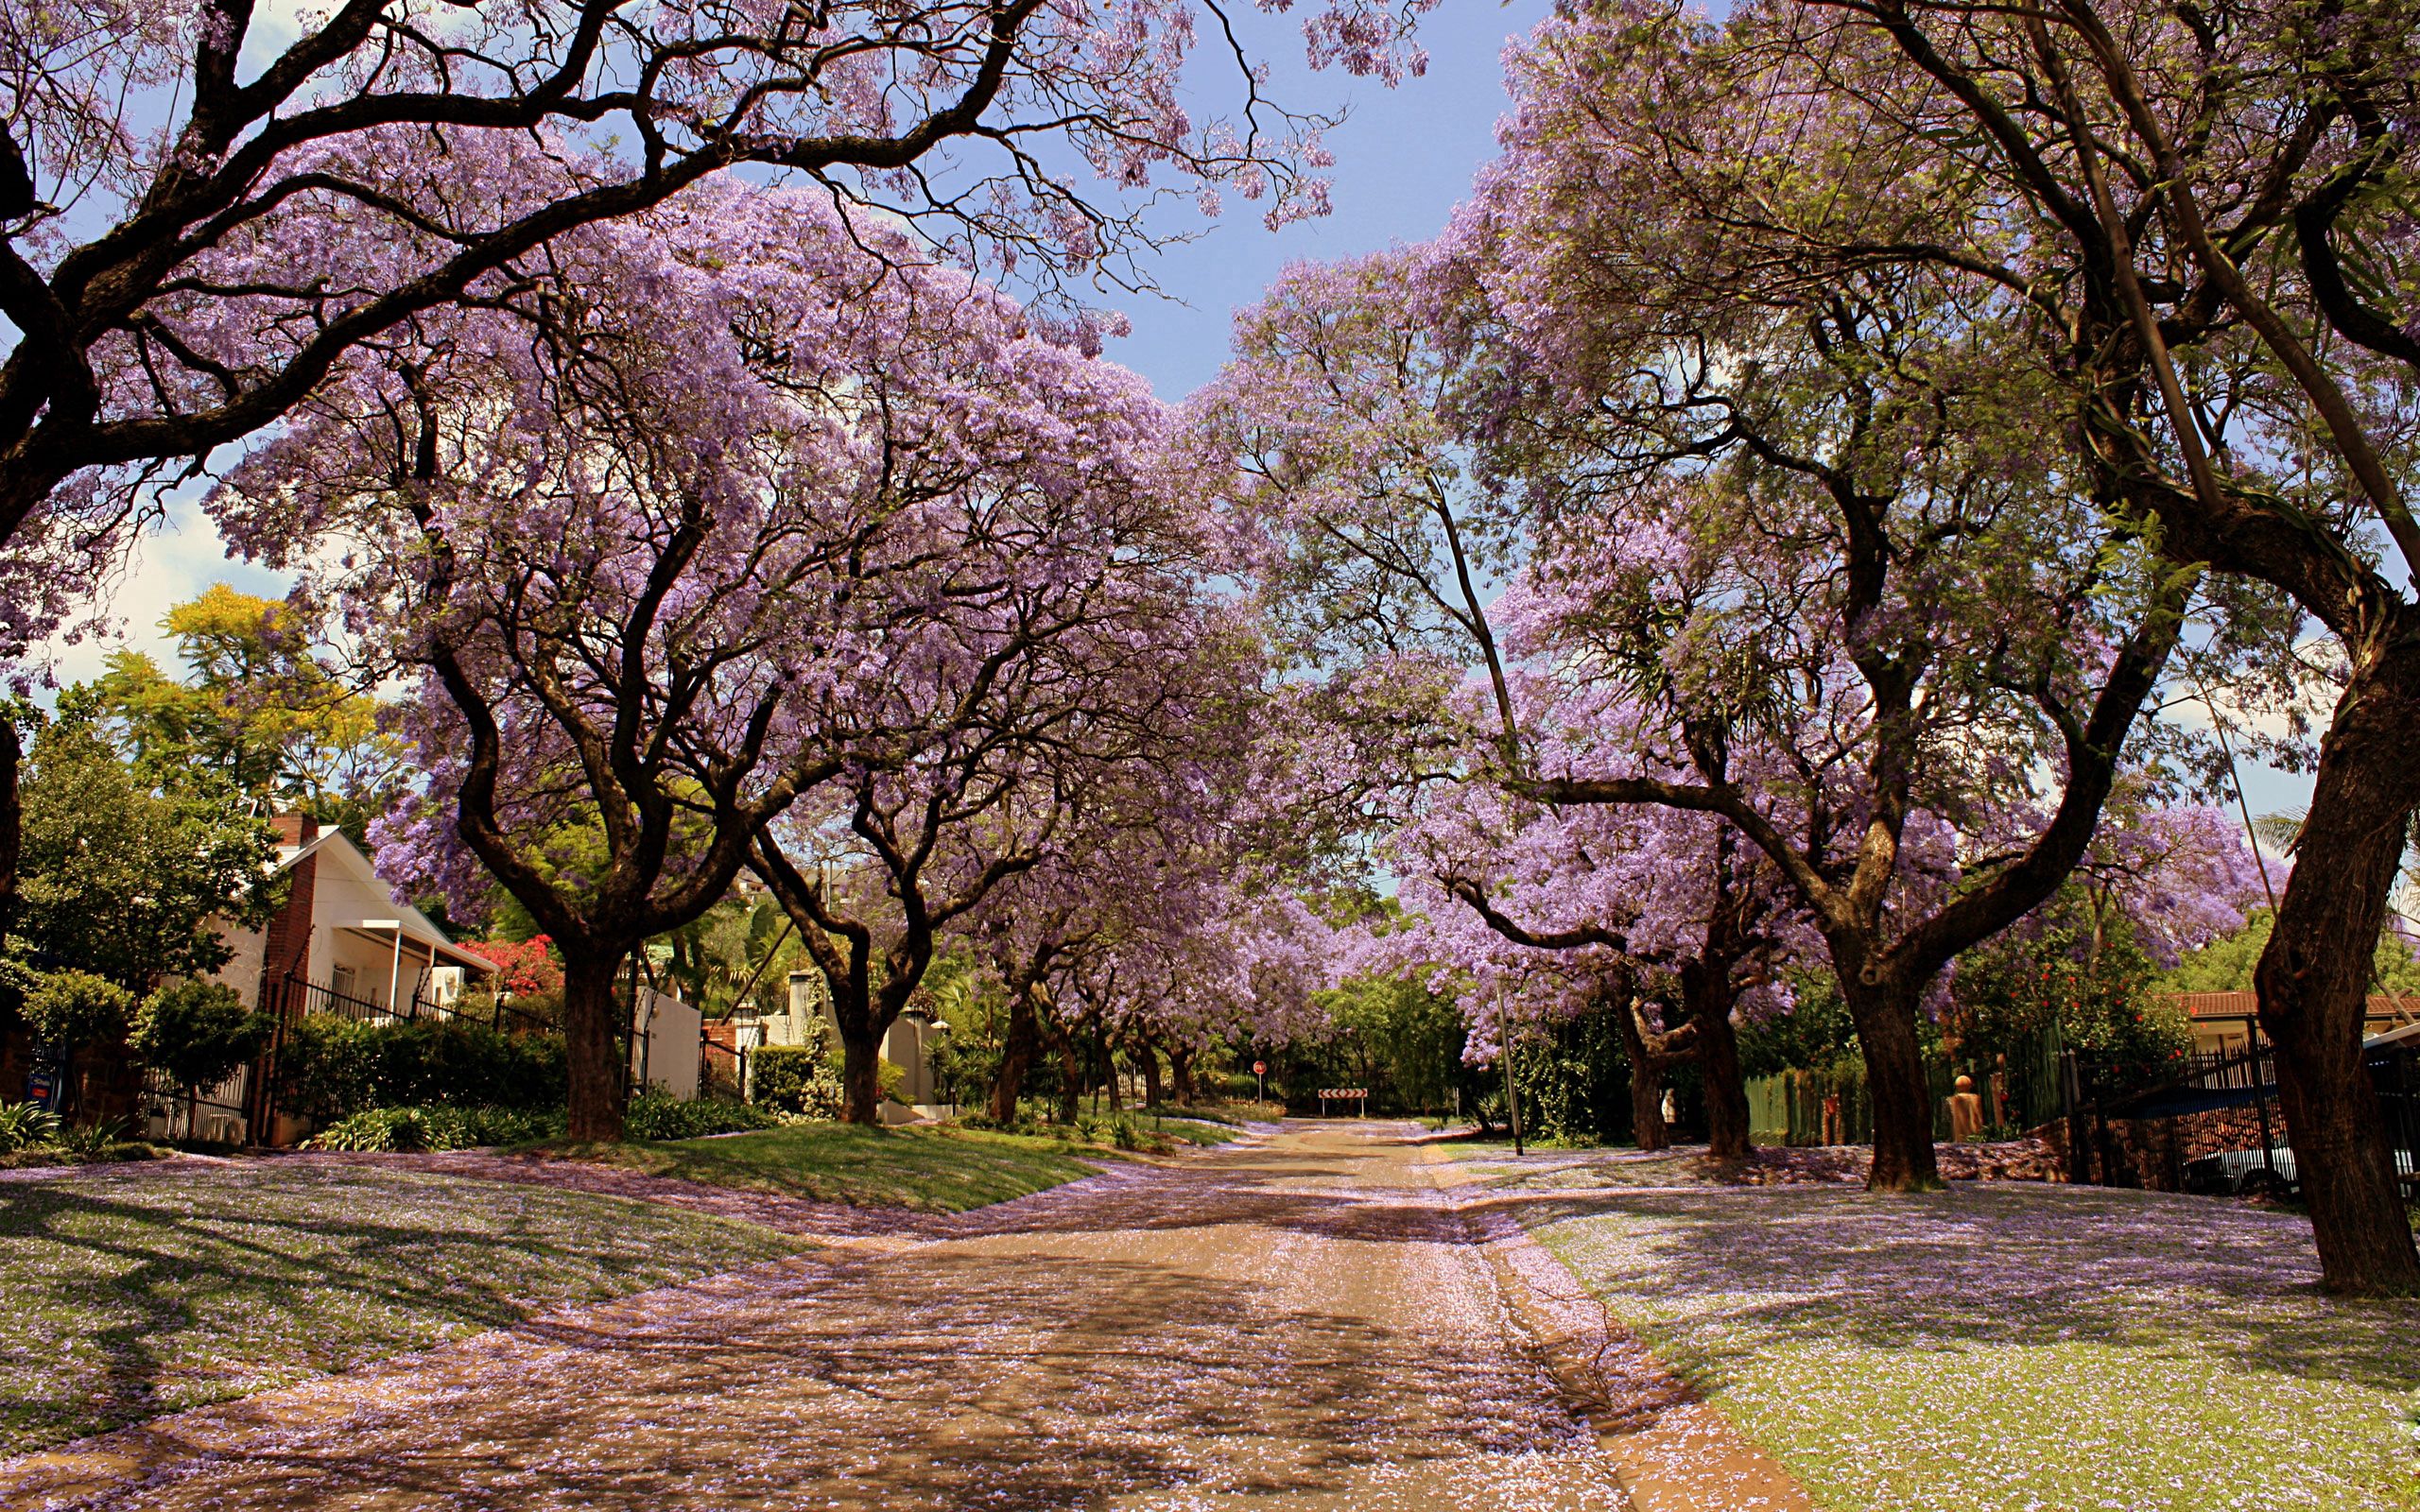 park, it's beautiful, nature, flowers, trees, spring, handsomely